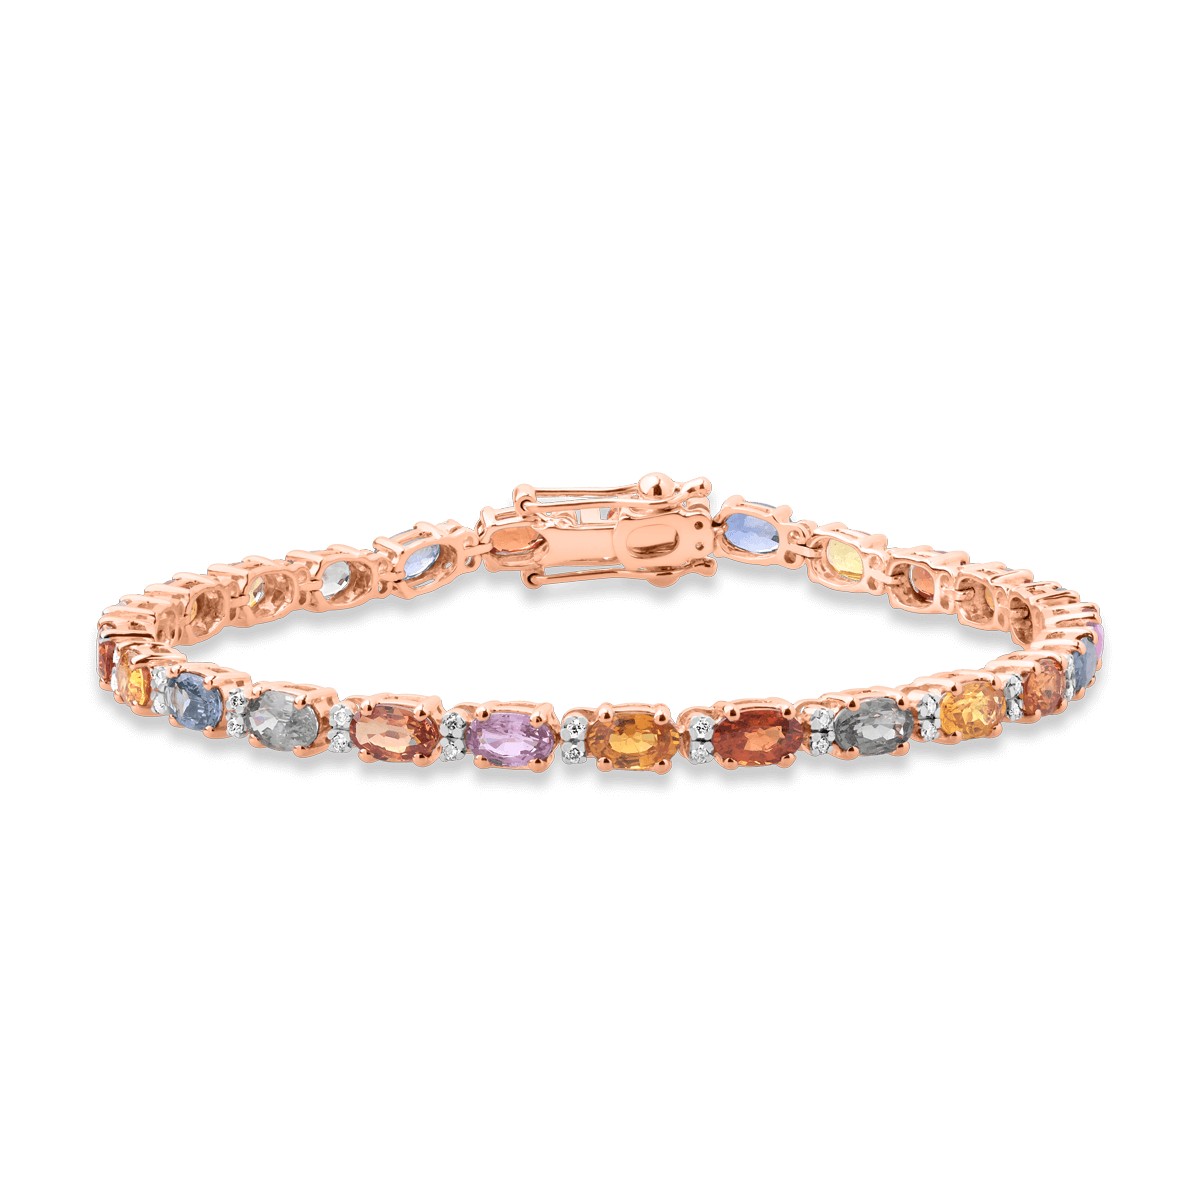 14K rose gold tennis bracelet with 8.09ct multicoloured sapphires and 0.24ct diamonds